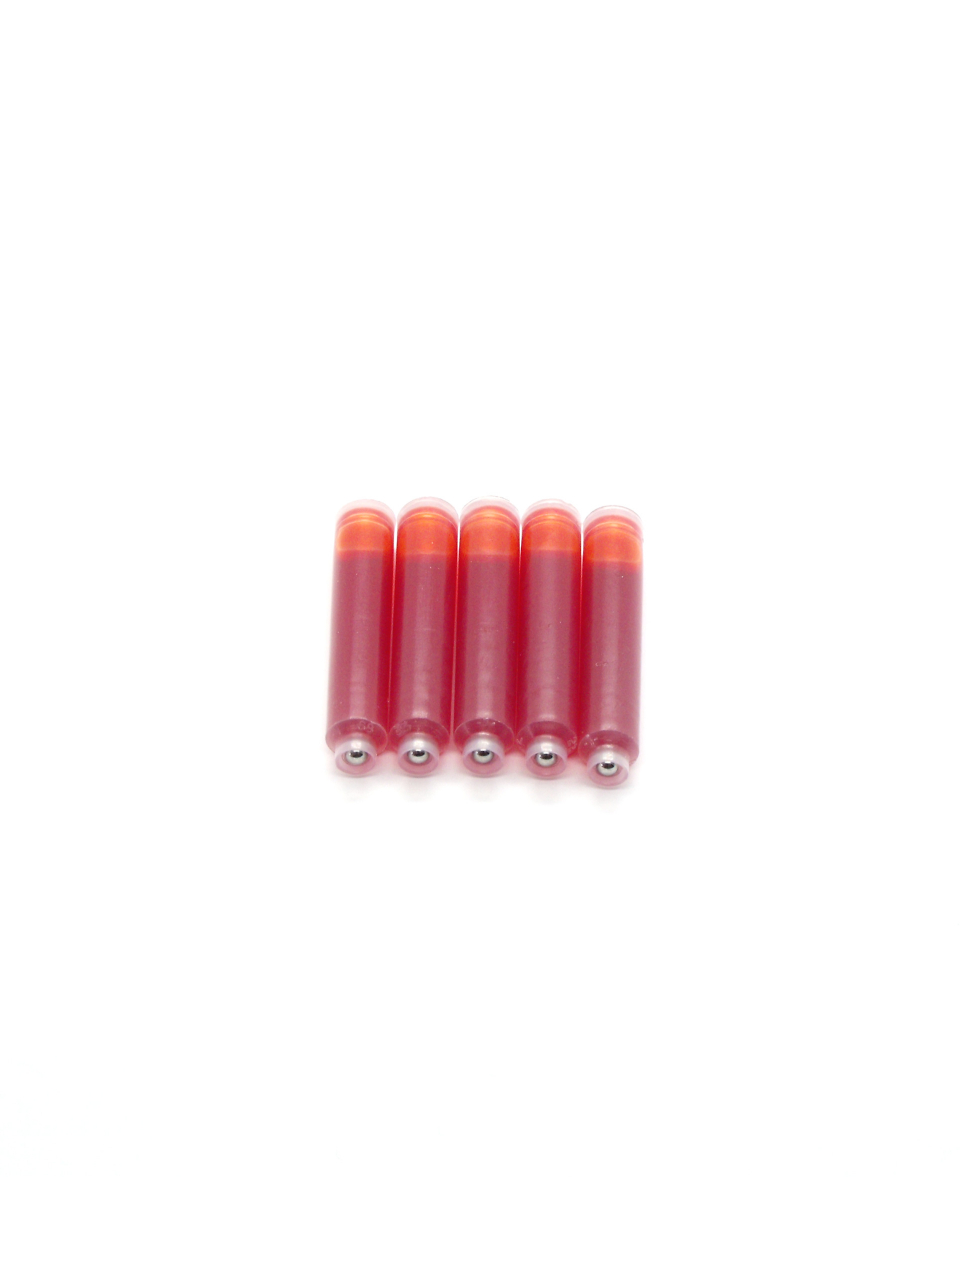 Top Ink Cartridges For A&W Fountain Pens (Orange)